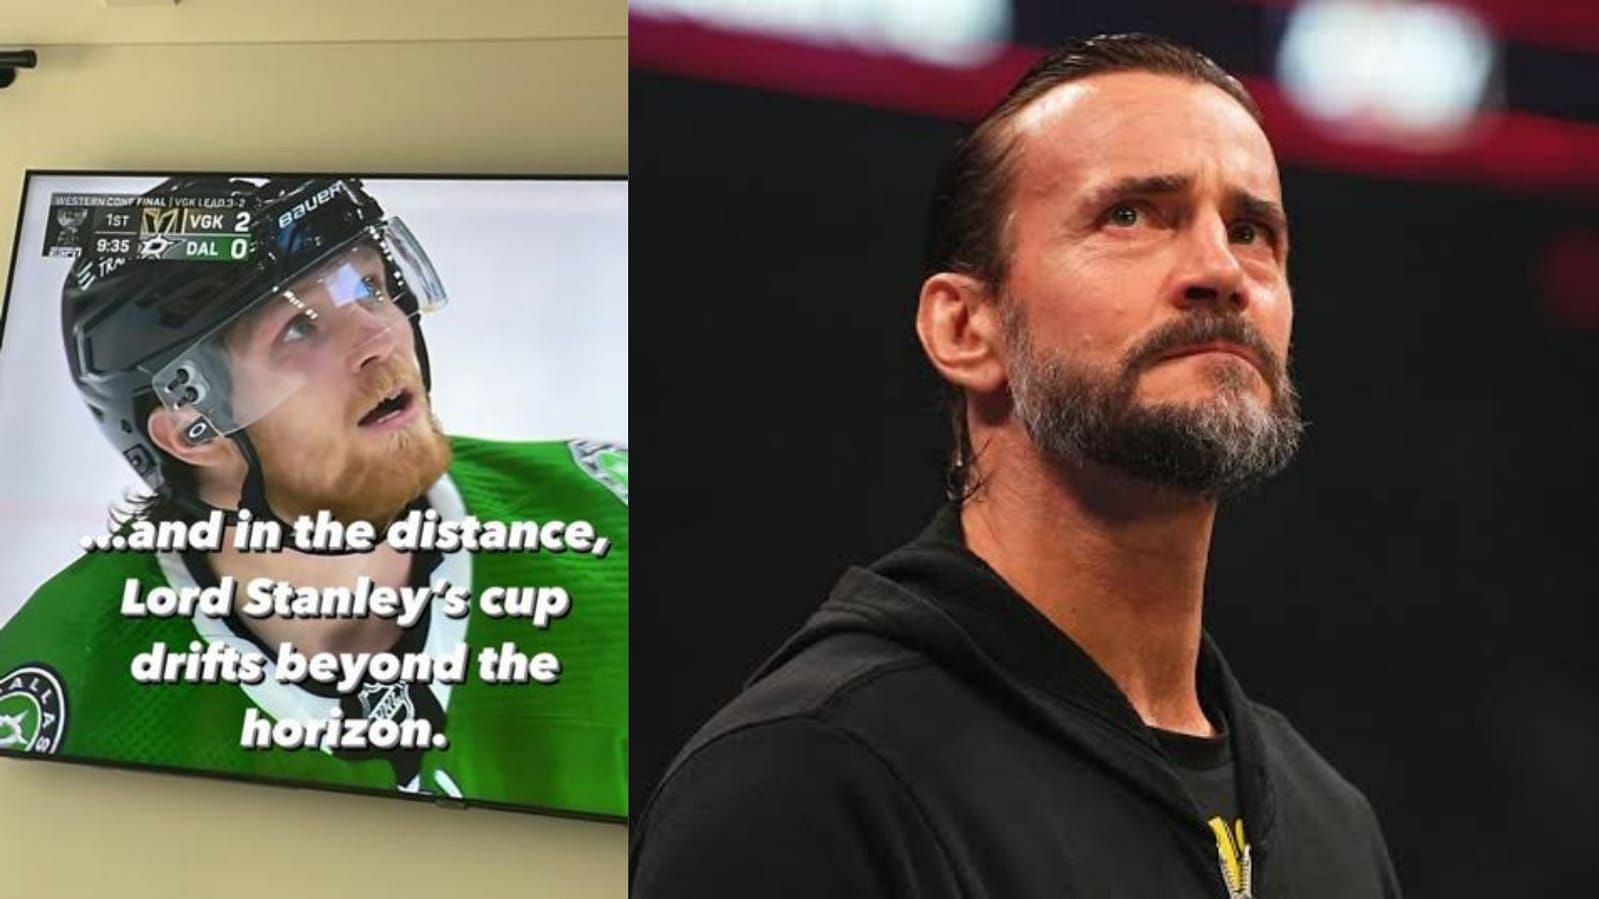 CM Punk turns Instagram commentator once again as Vegas beat Dallas to book Stanley Cup berth